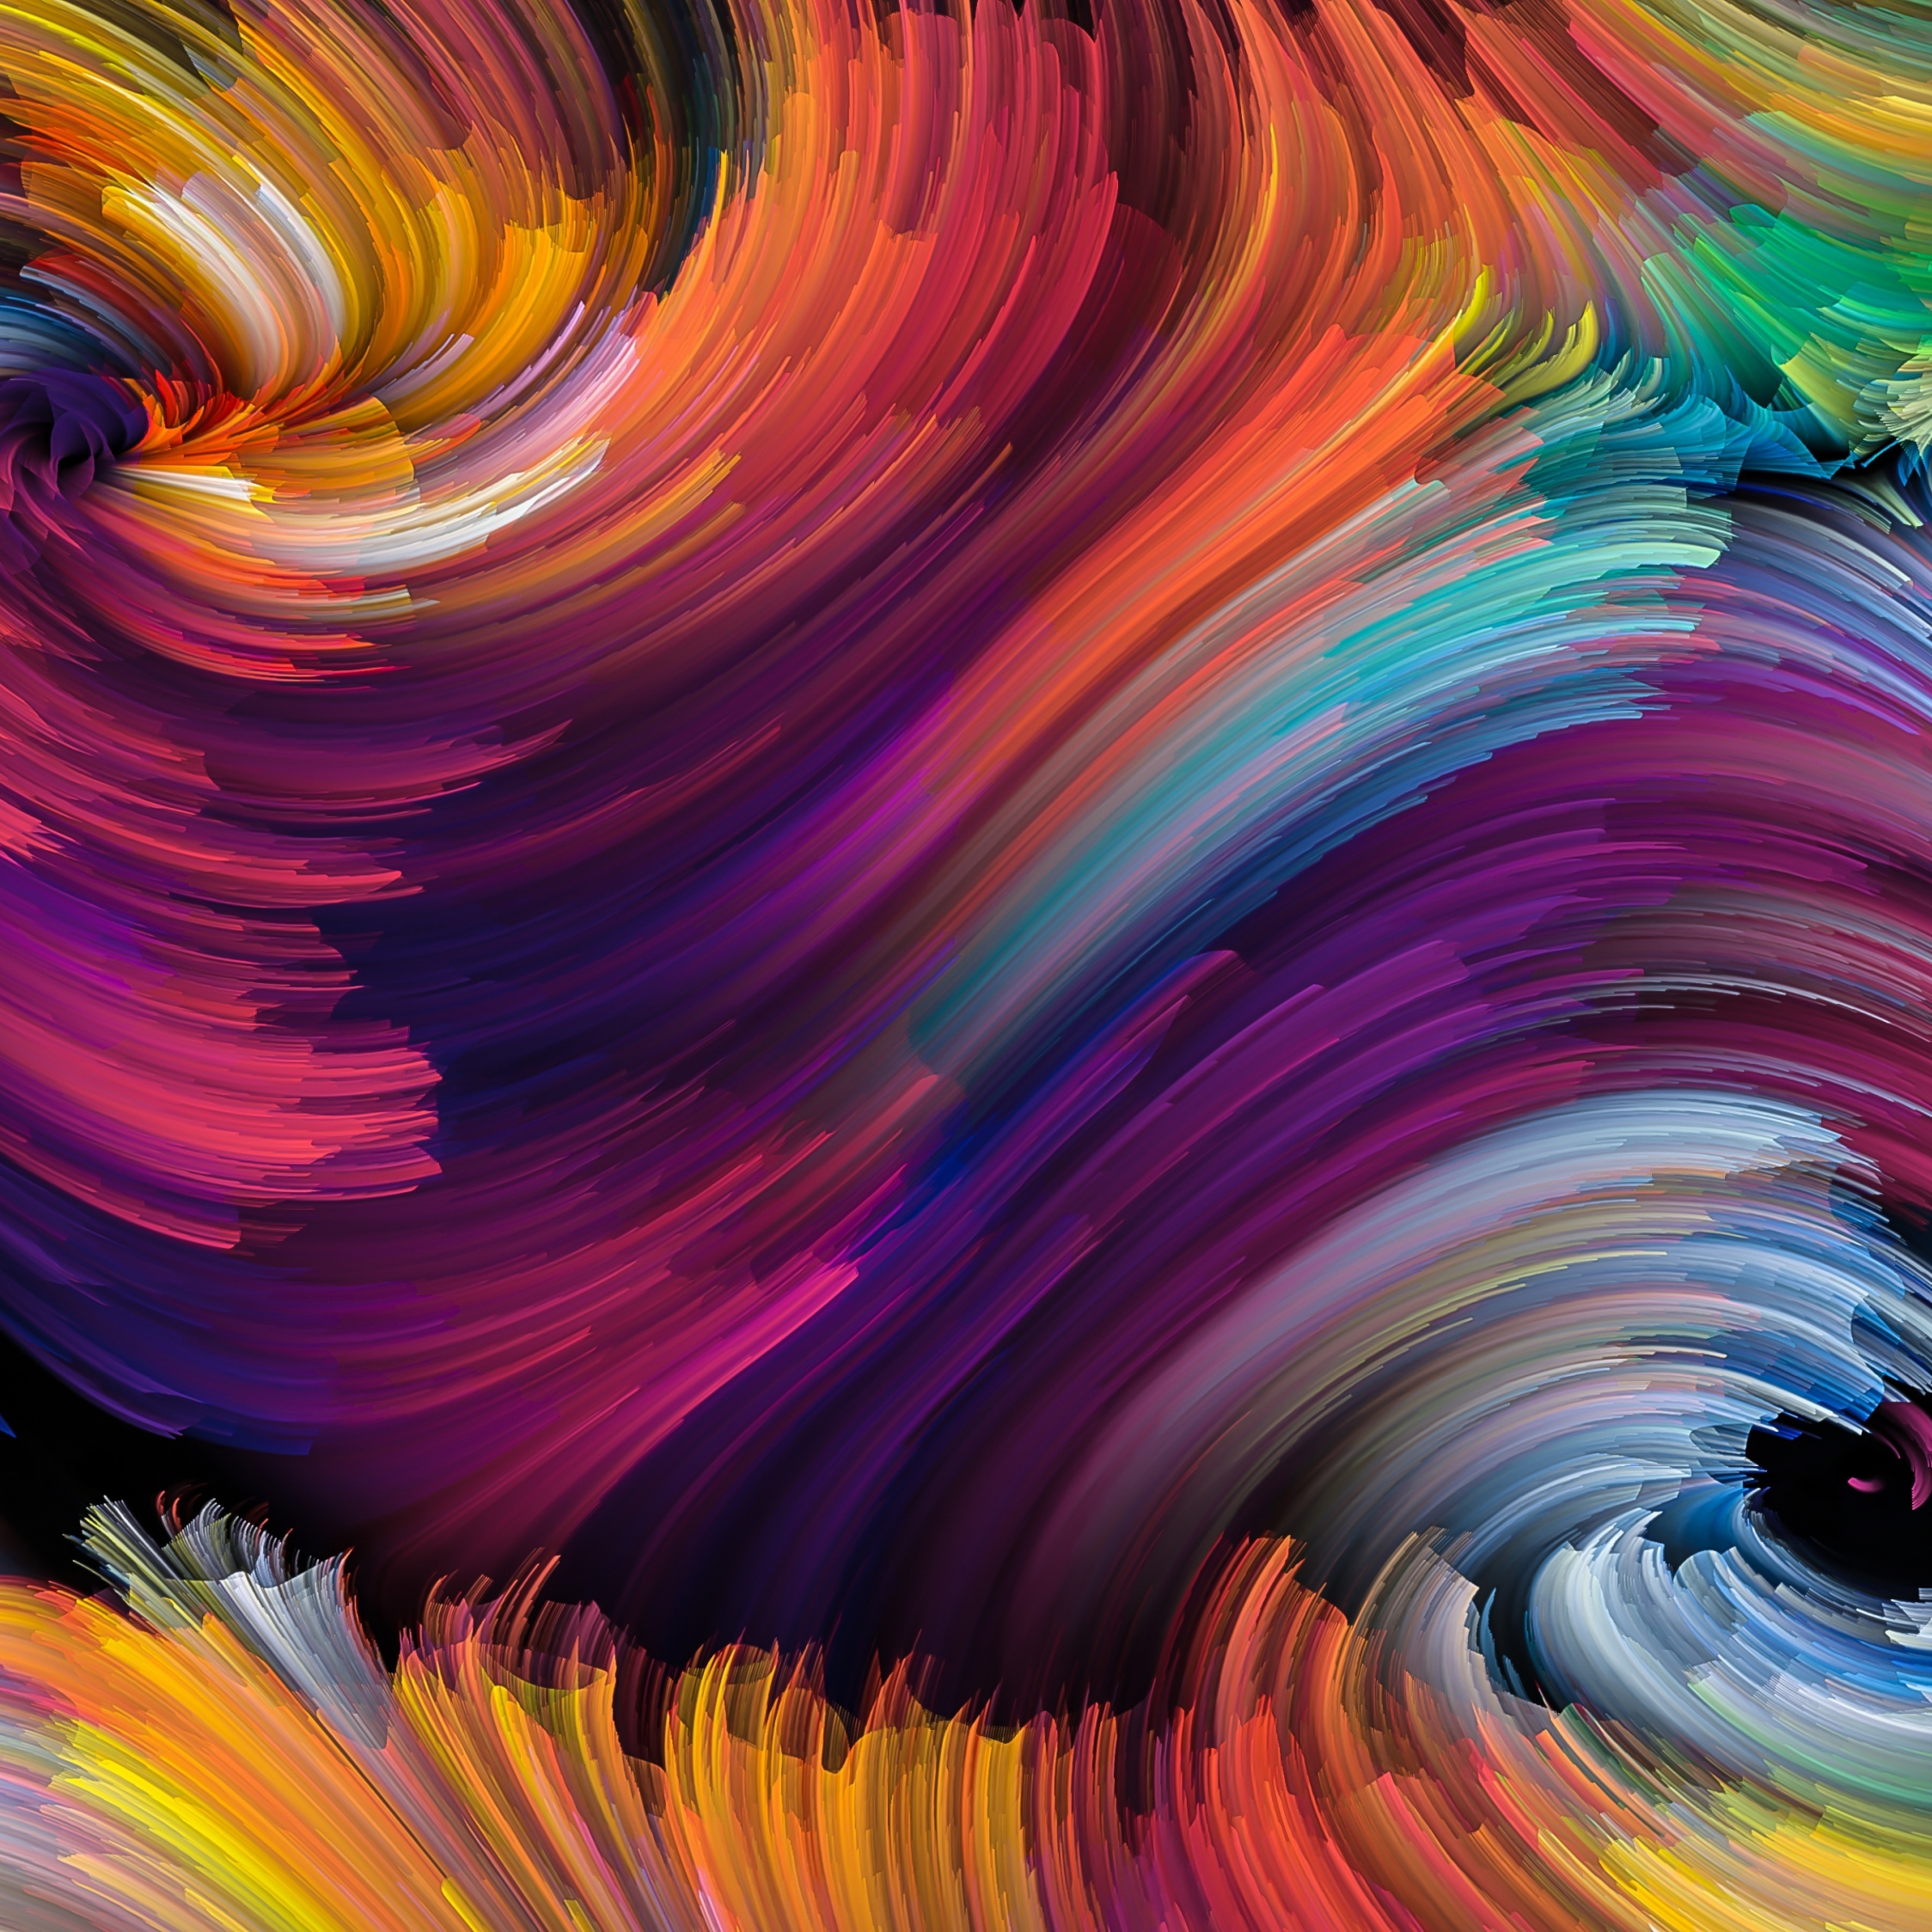 Download wallpaper 2248x2248 color, abstract, backdrop, spiral, ipad air, ipad  air 2, ipad 3, ipad 4, ipad mini 2, ipad mini 3, 2248x2248 hd background,  21860